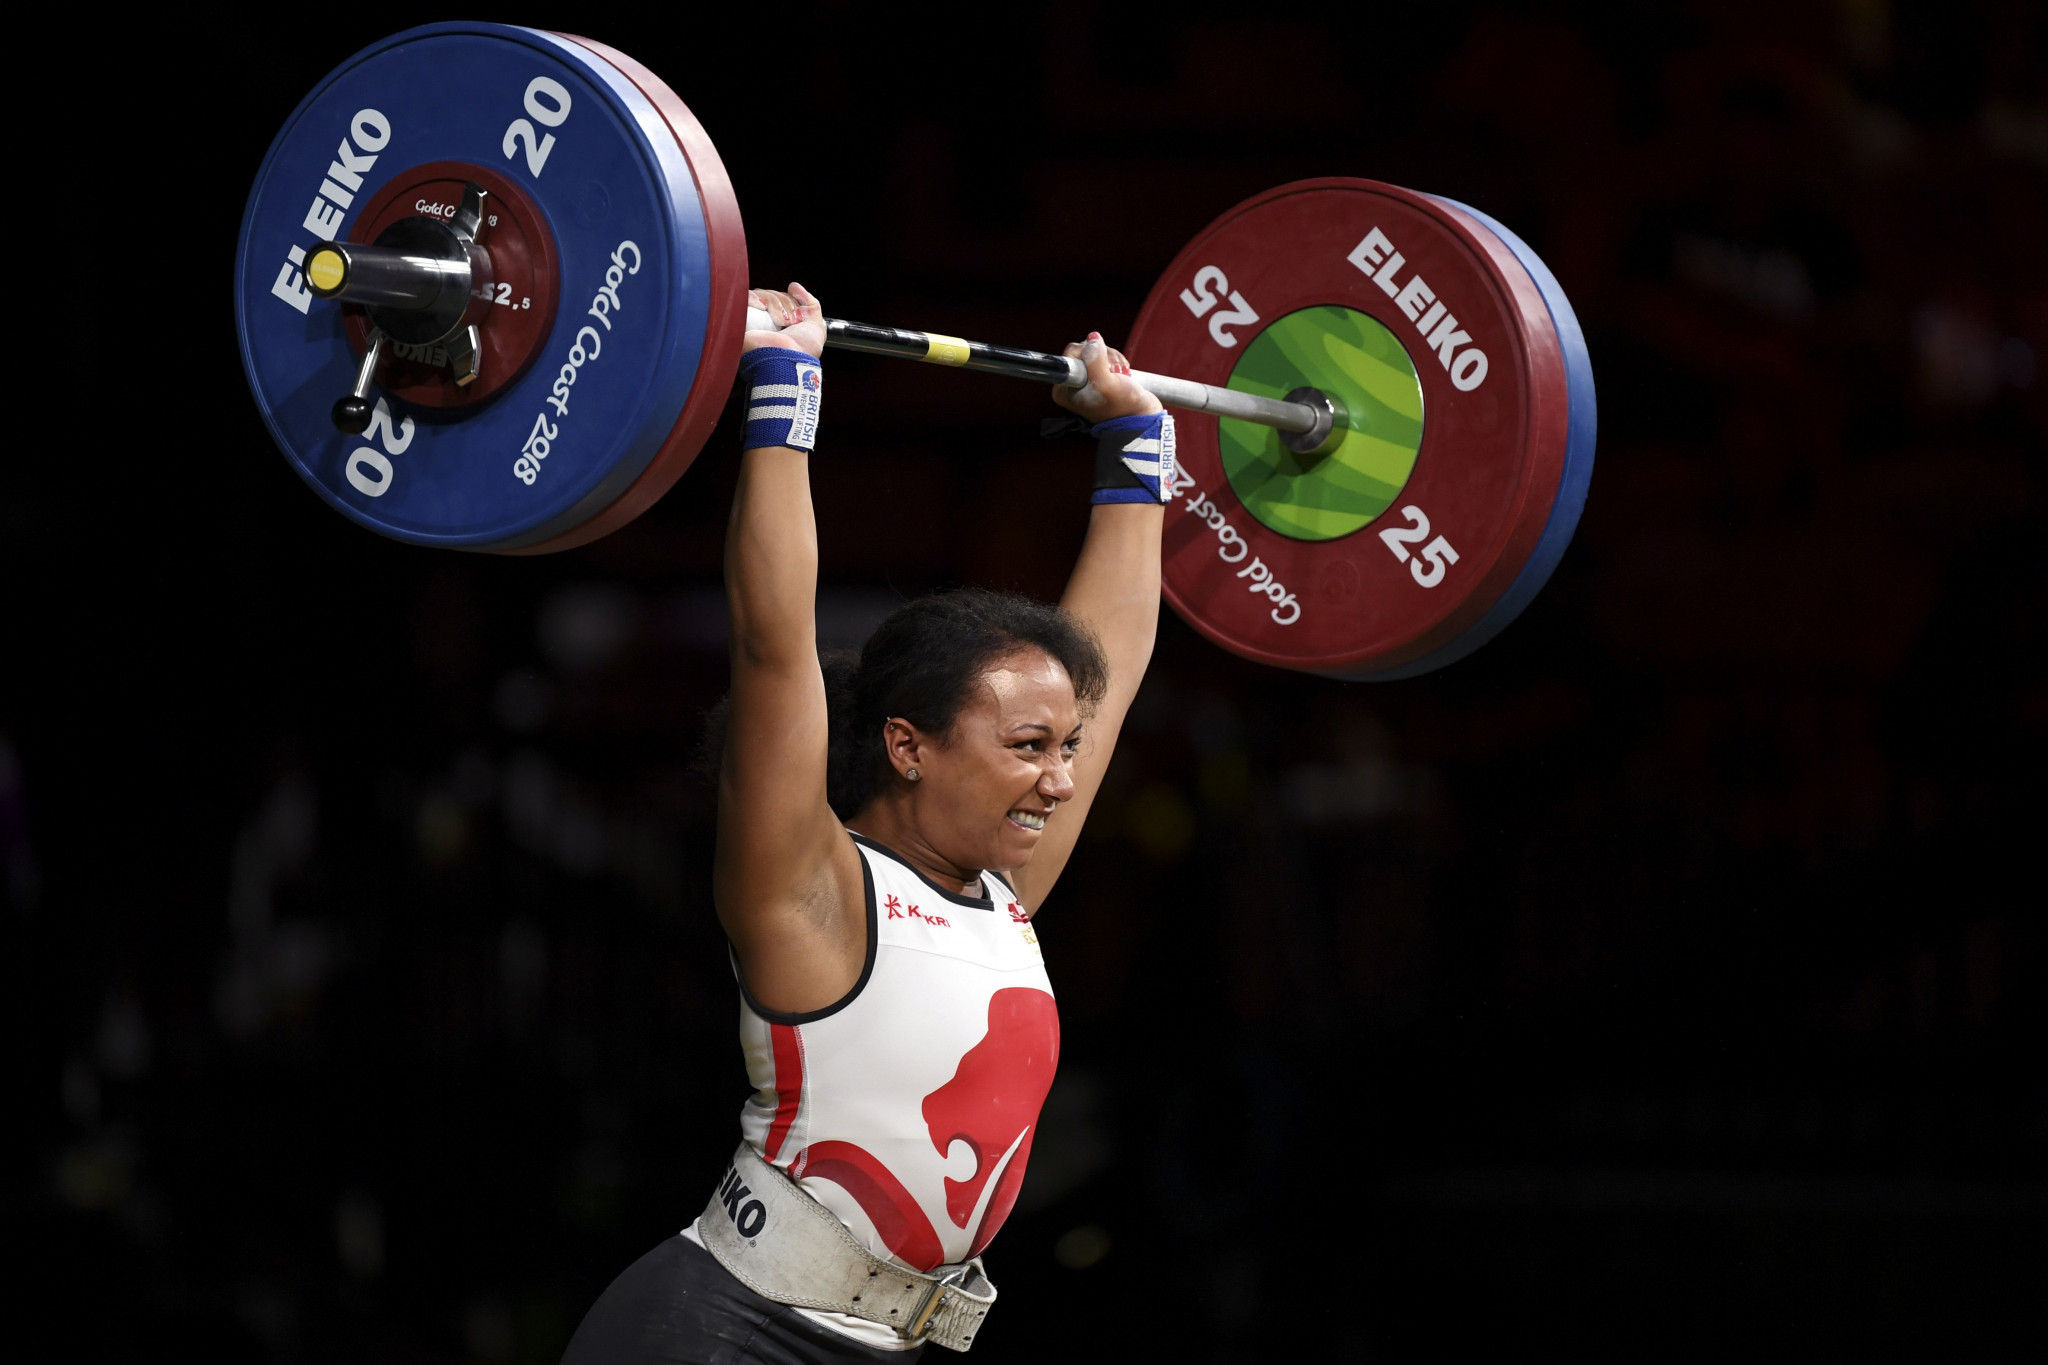 Zoe Smith is one of Britain's best hopes for qualifying for Tokyo 2020 ©Getty Images